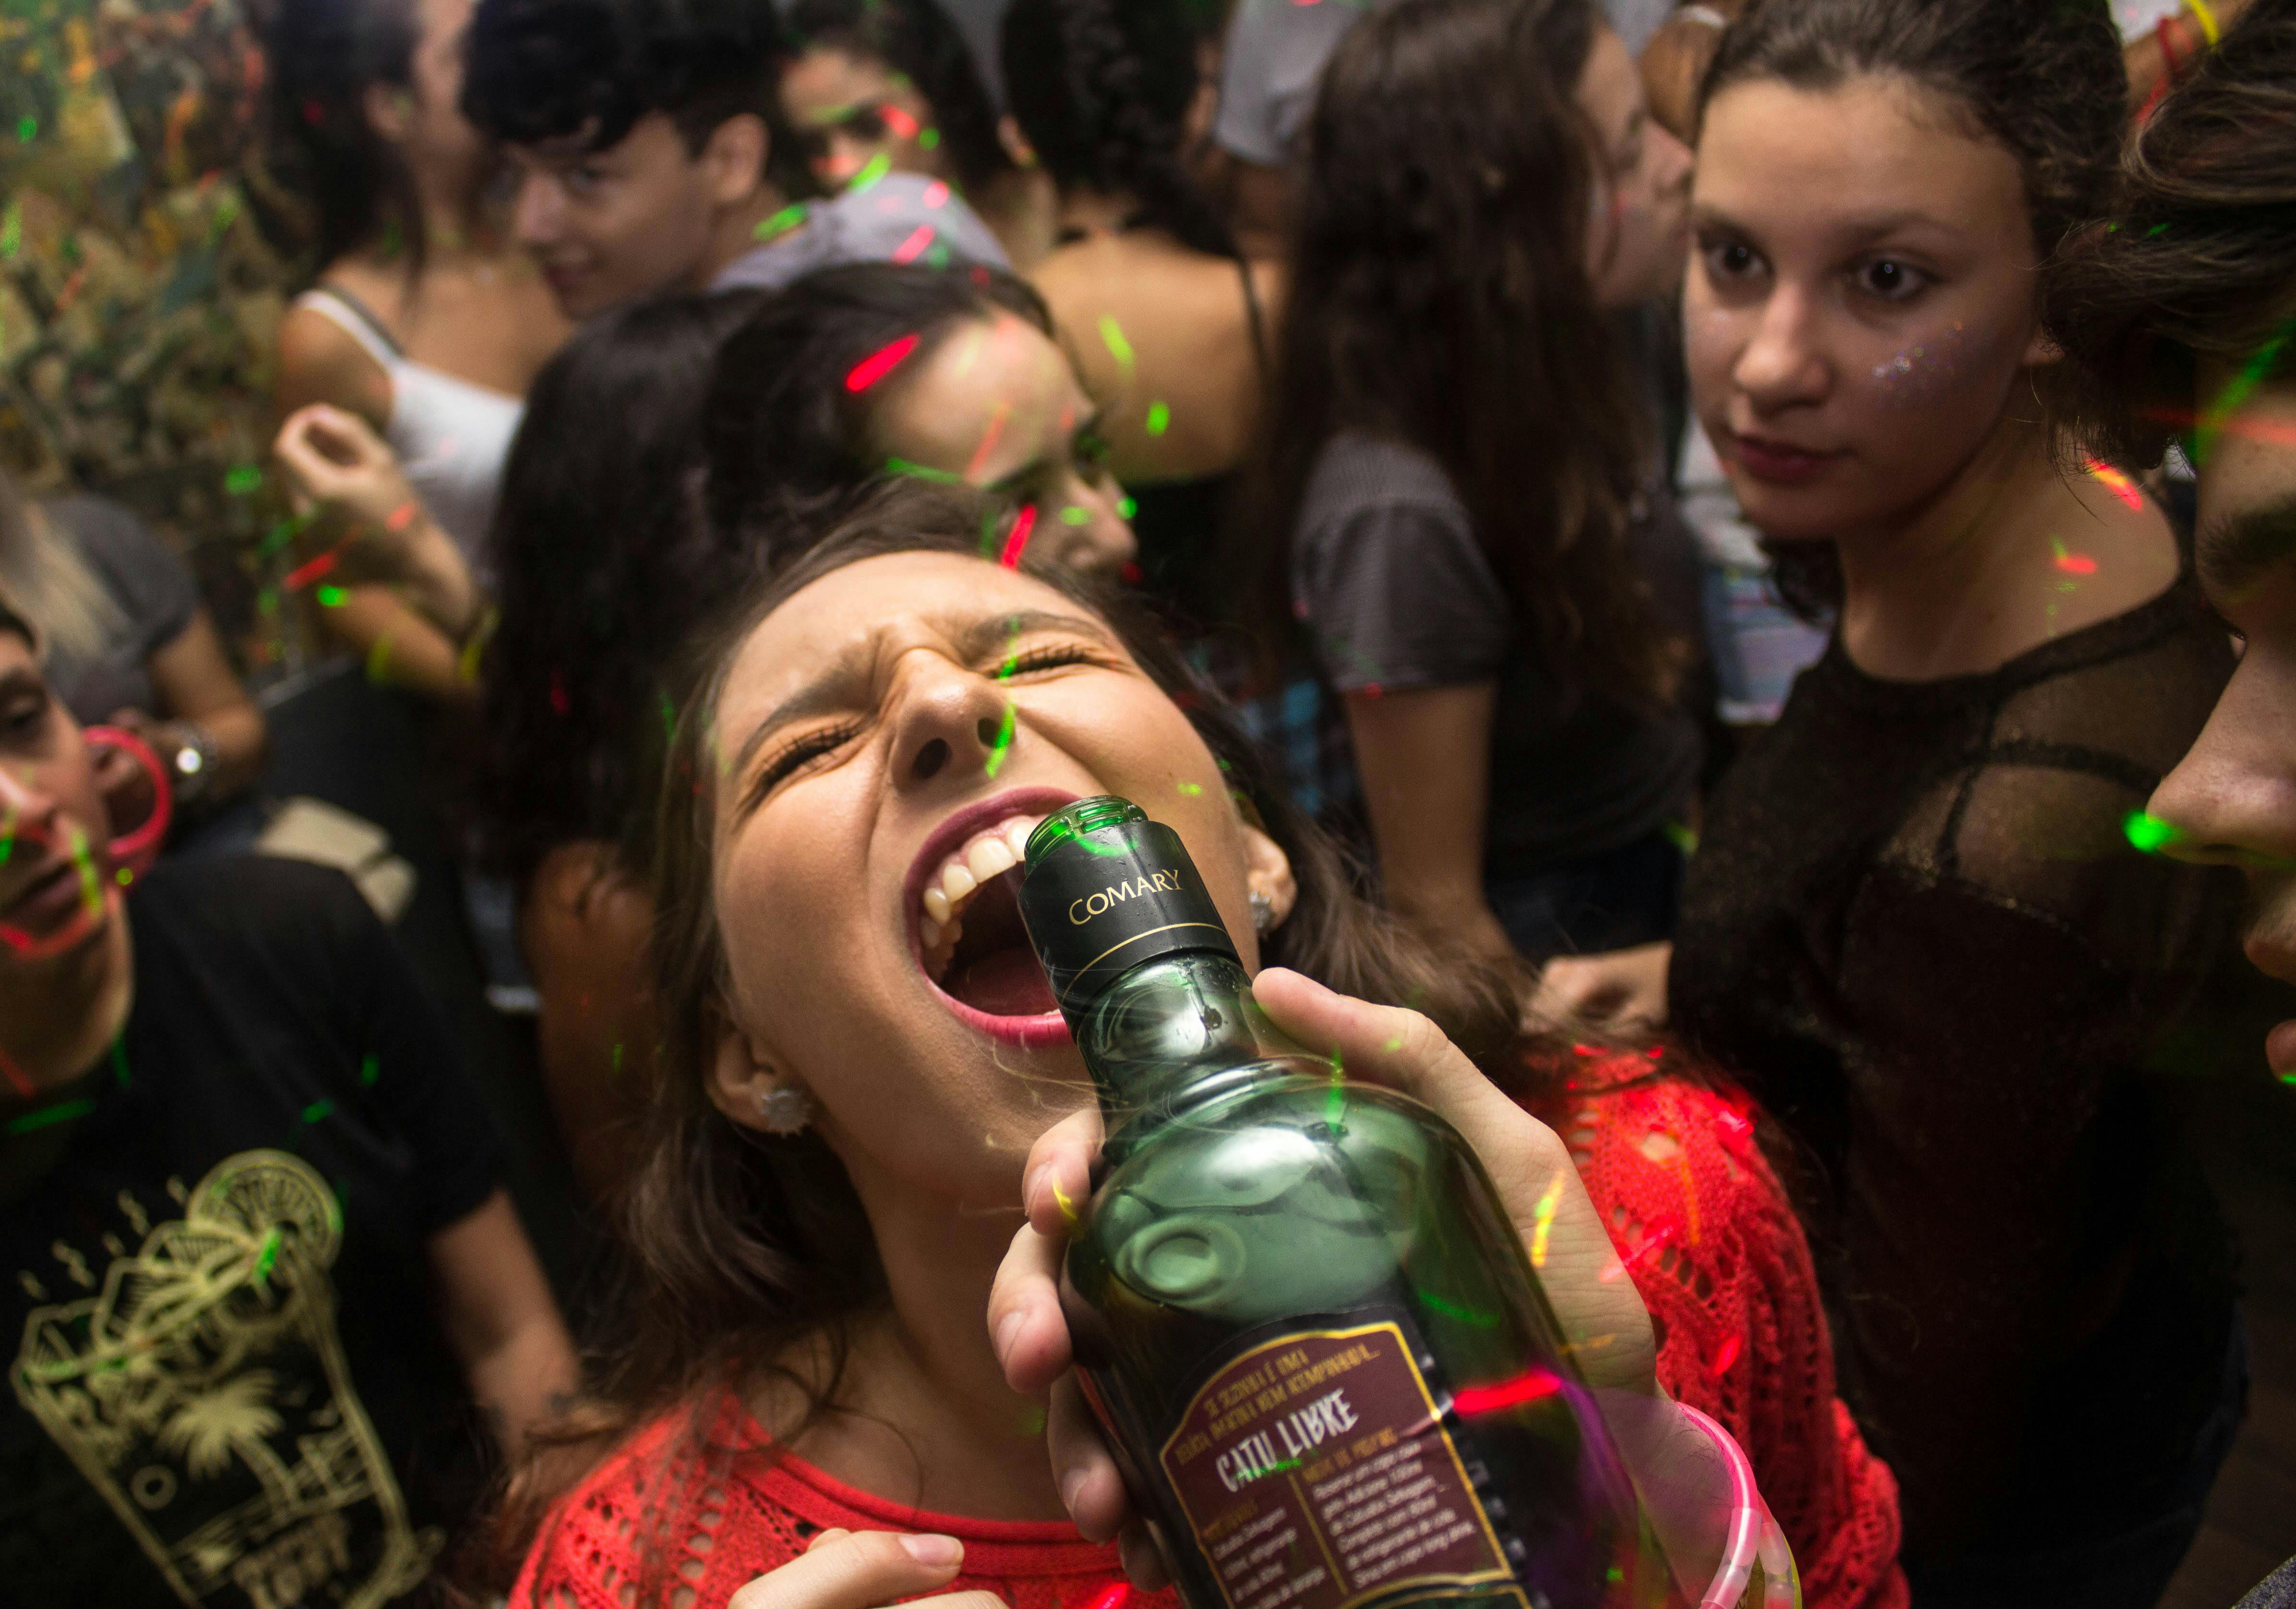 Woman drinking alcoholic drink at a party. | Photo: Pexels